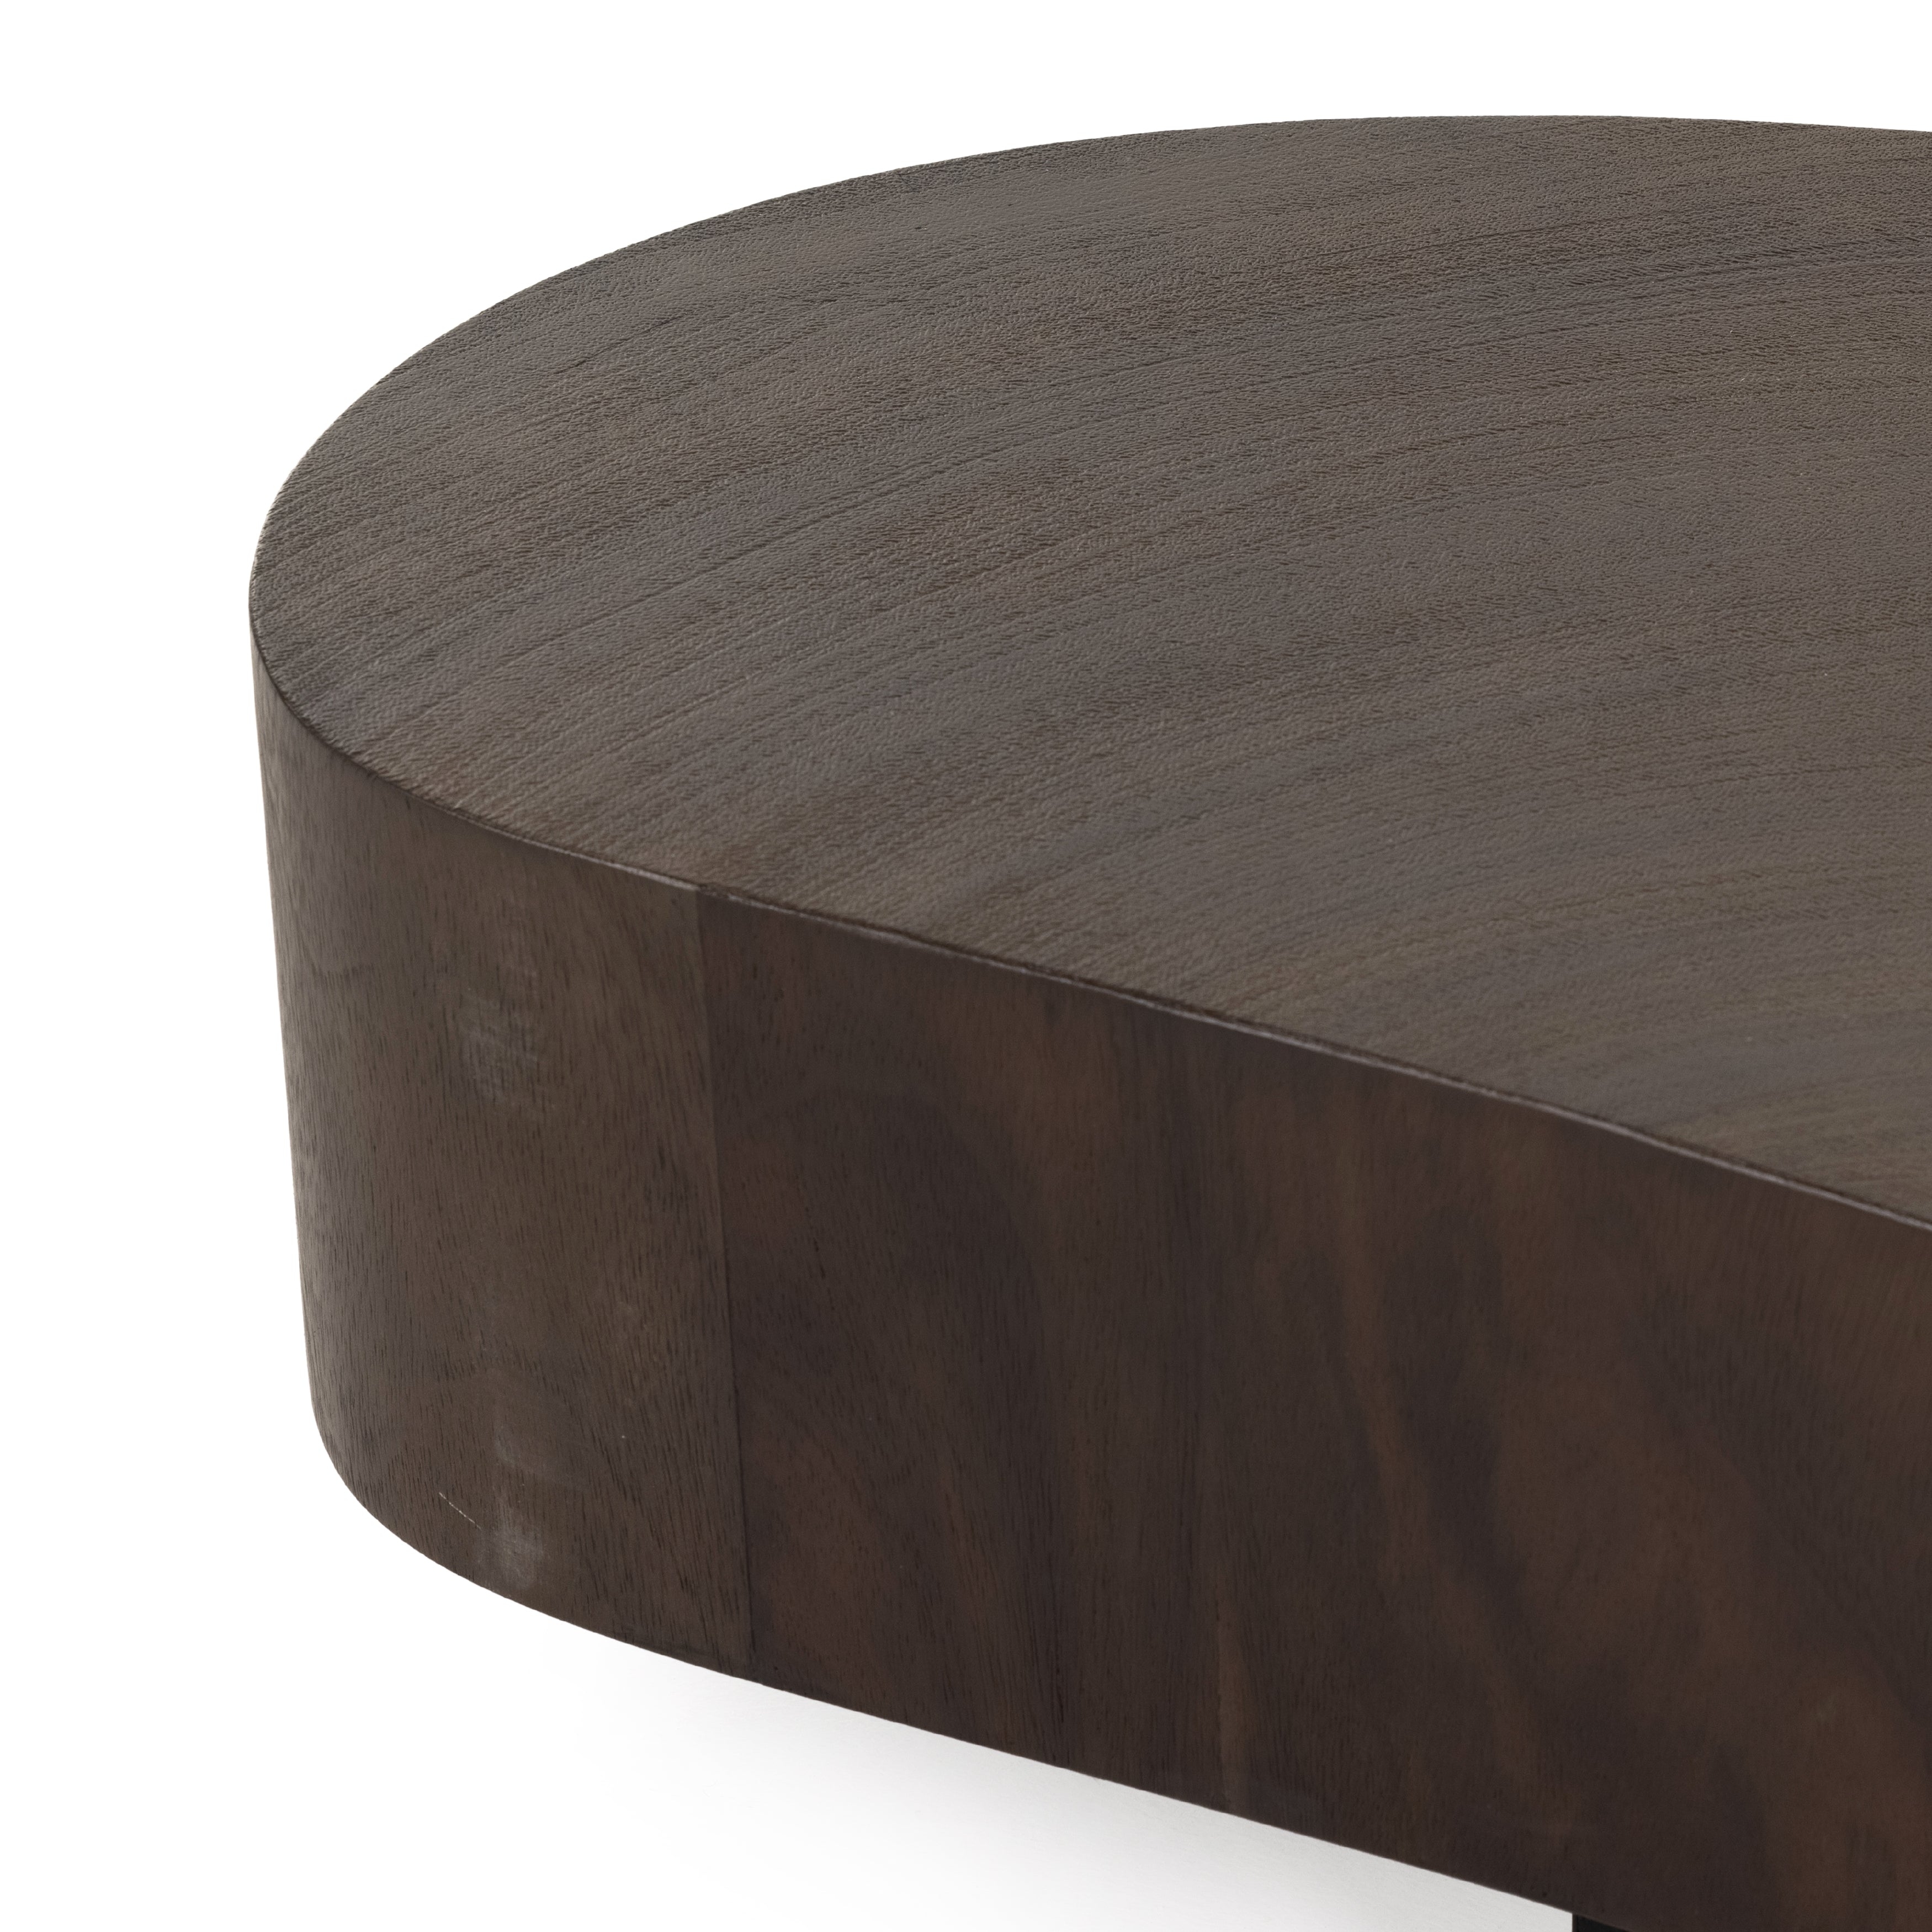 Natural beauty, total novelty. Oyster-cut Guanacaste forms a petite, kidney-shaped coffee table. Visible rings speak to woods' natural graining, while a dark gunmetal-finished base provides clean contrast to the whole look. Option to pair with taller piece, sold separately. Amethyst Home provides interior design, new construction, custom furniture, and area rugs in the Boston metro area.